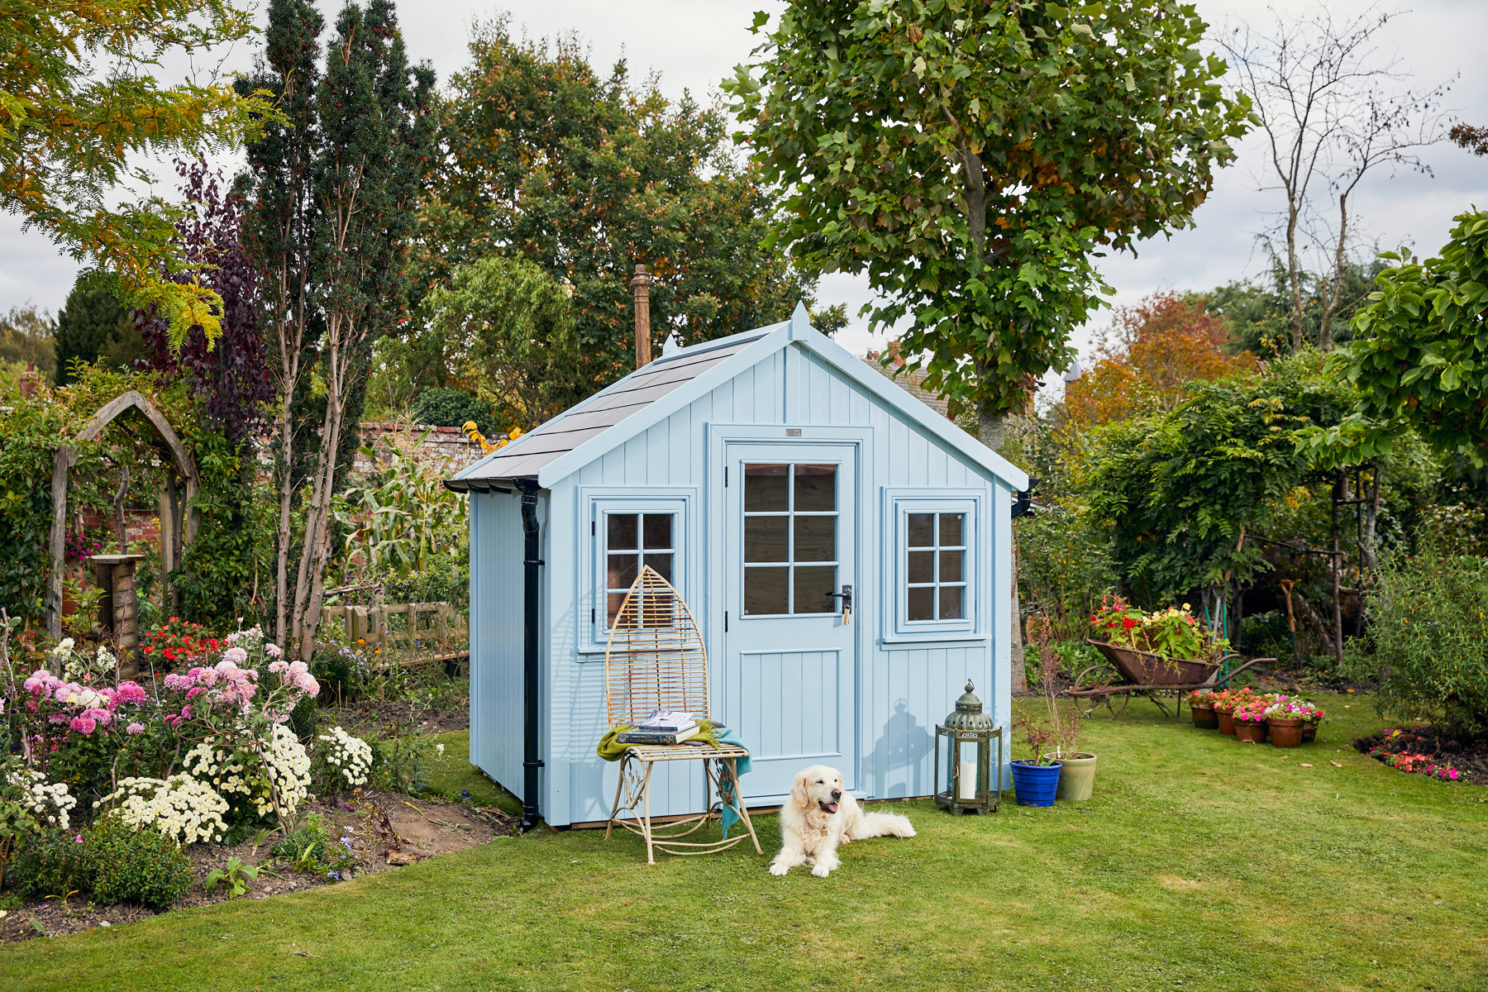 a Useful sized Garden Shed